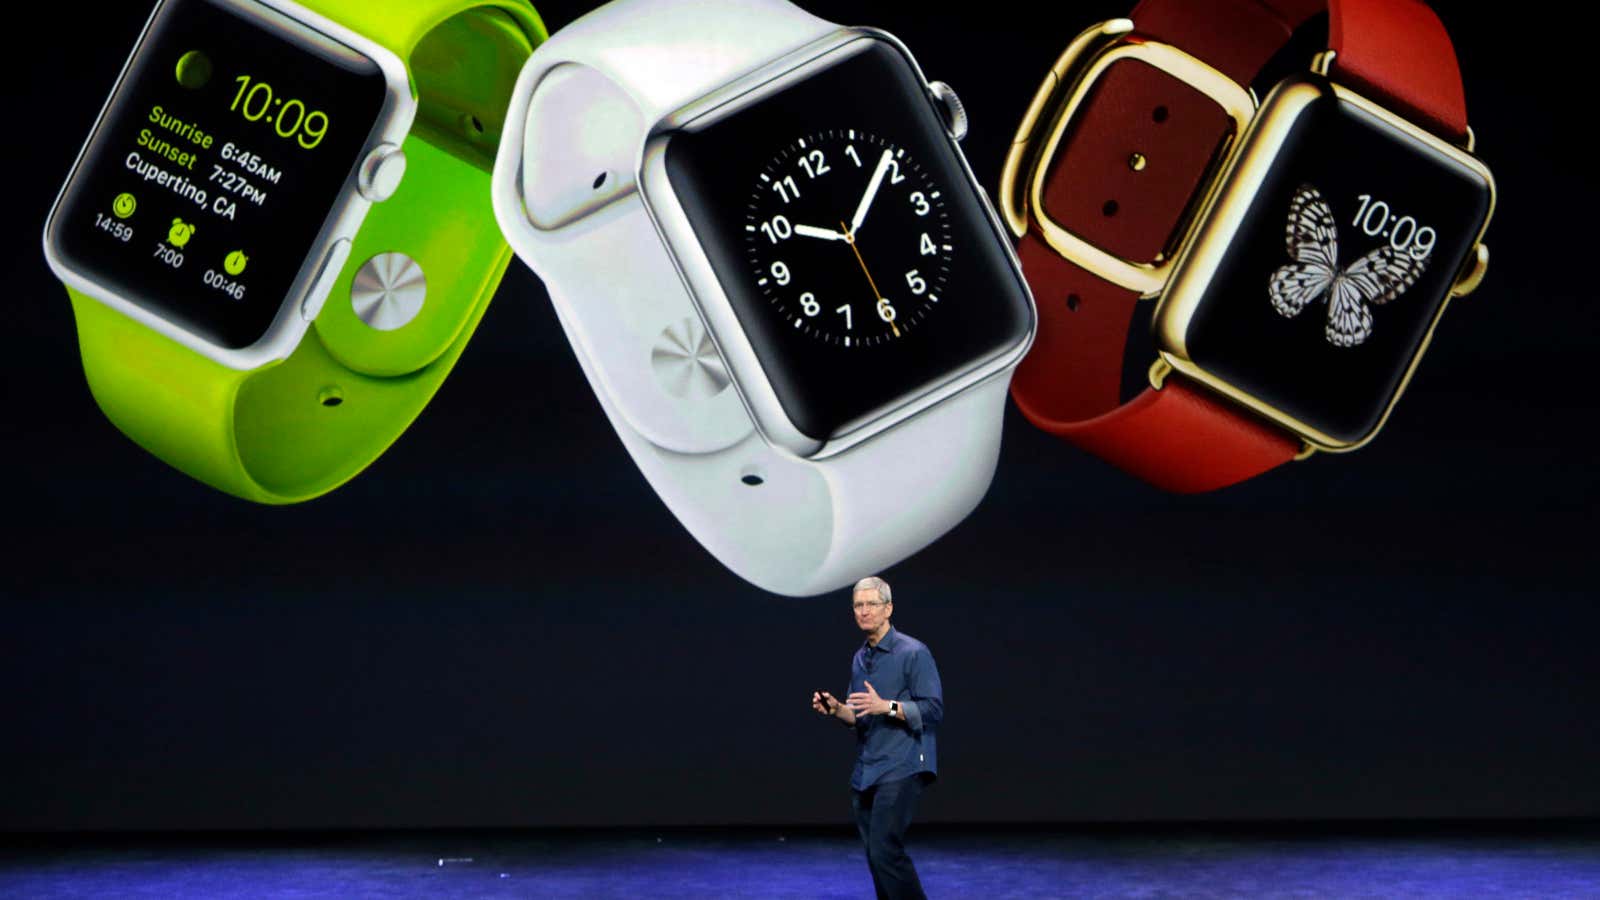 Can Apple repeat its iPad magic with the Watch?